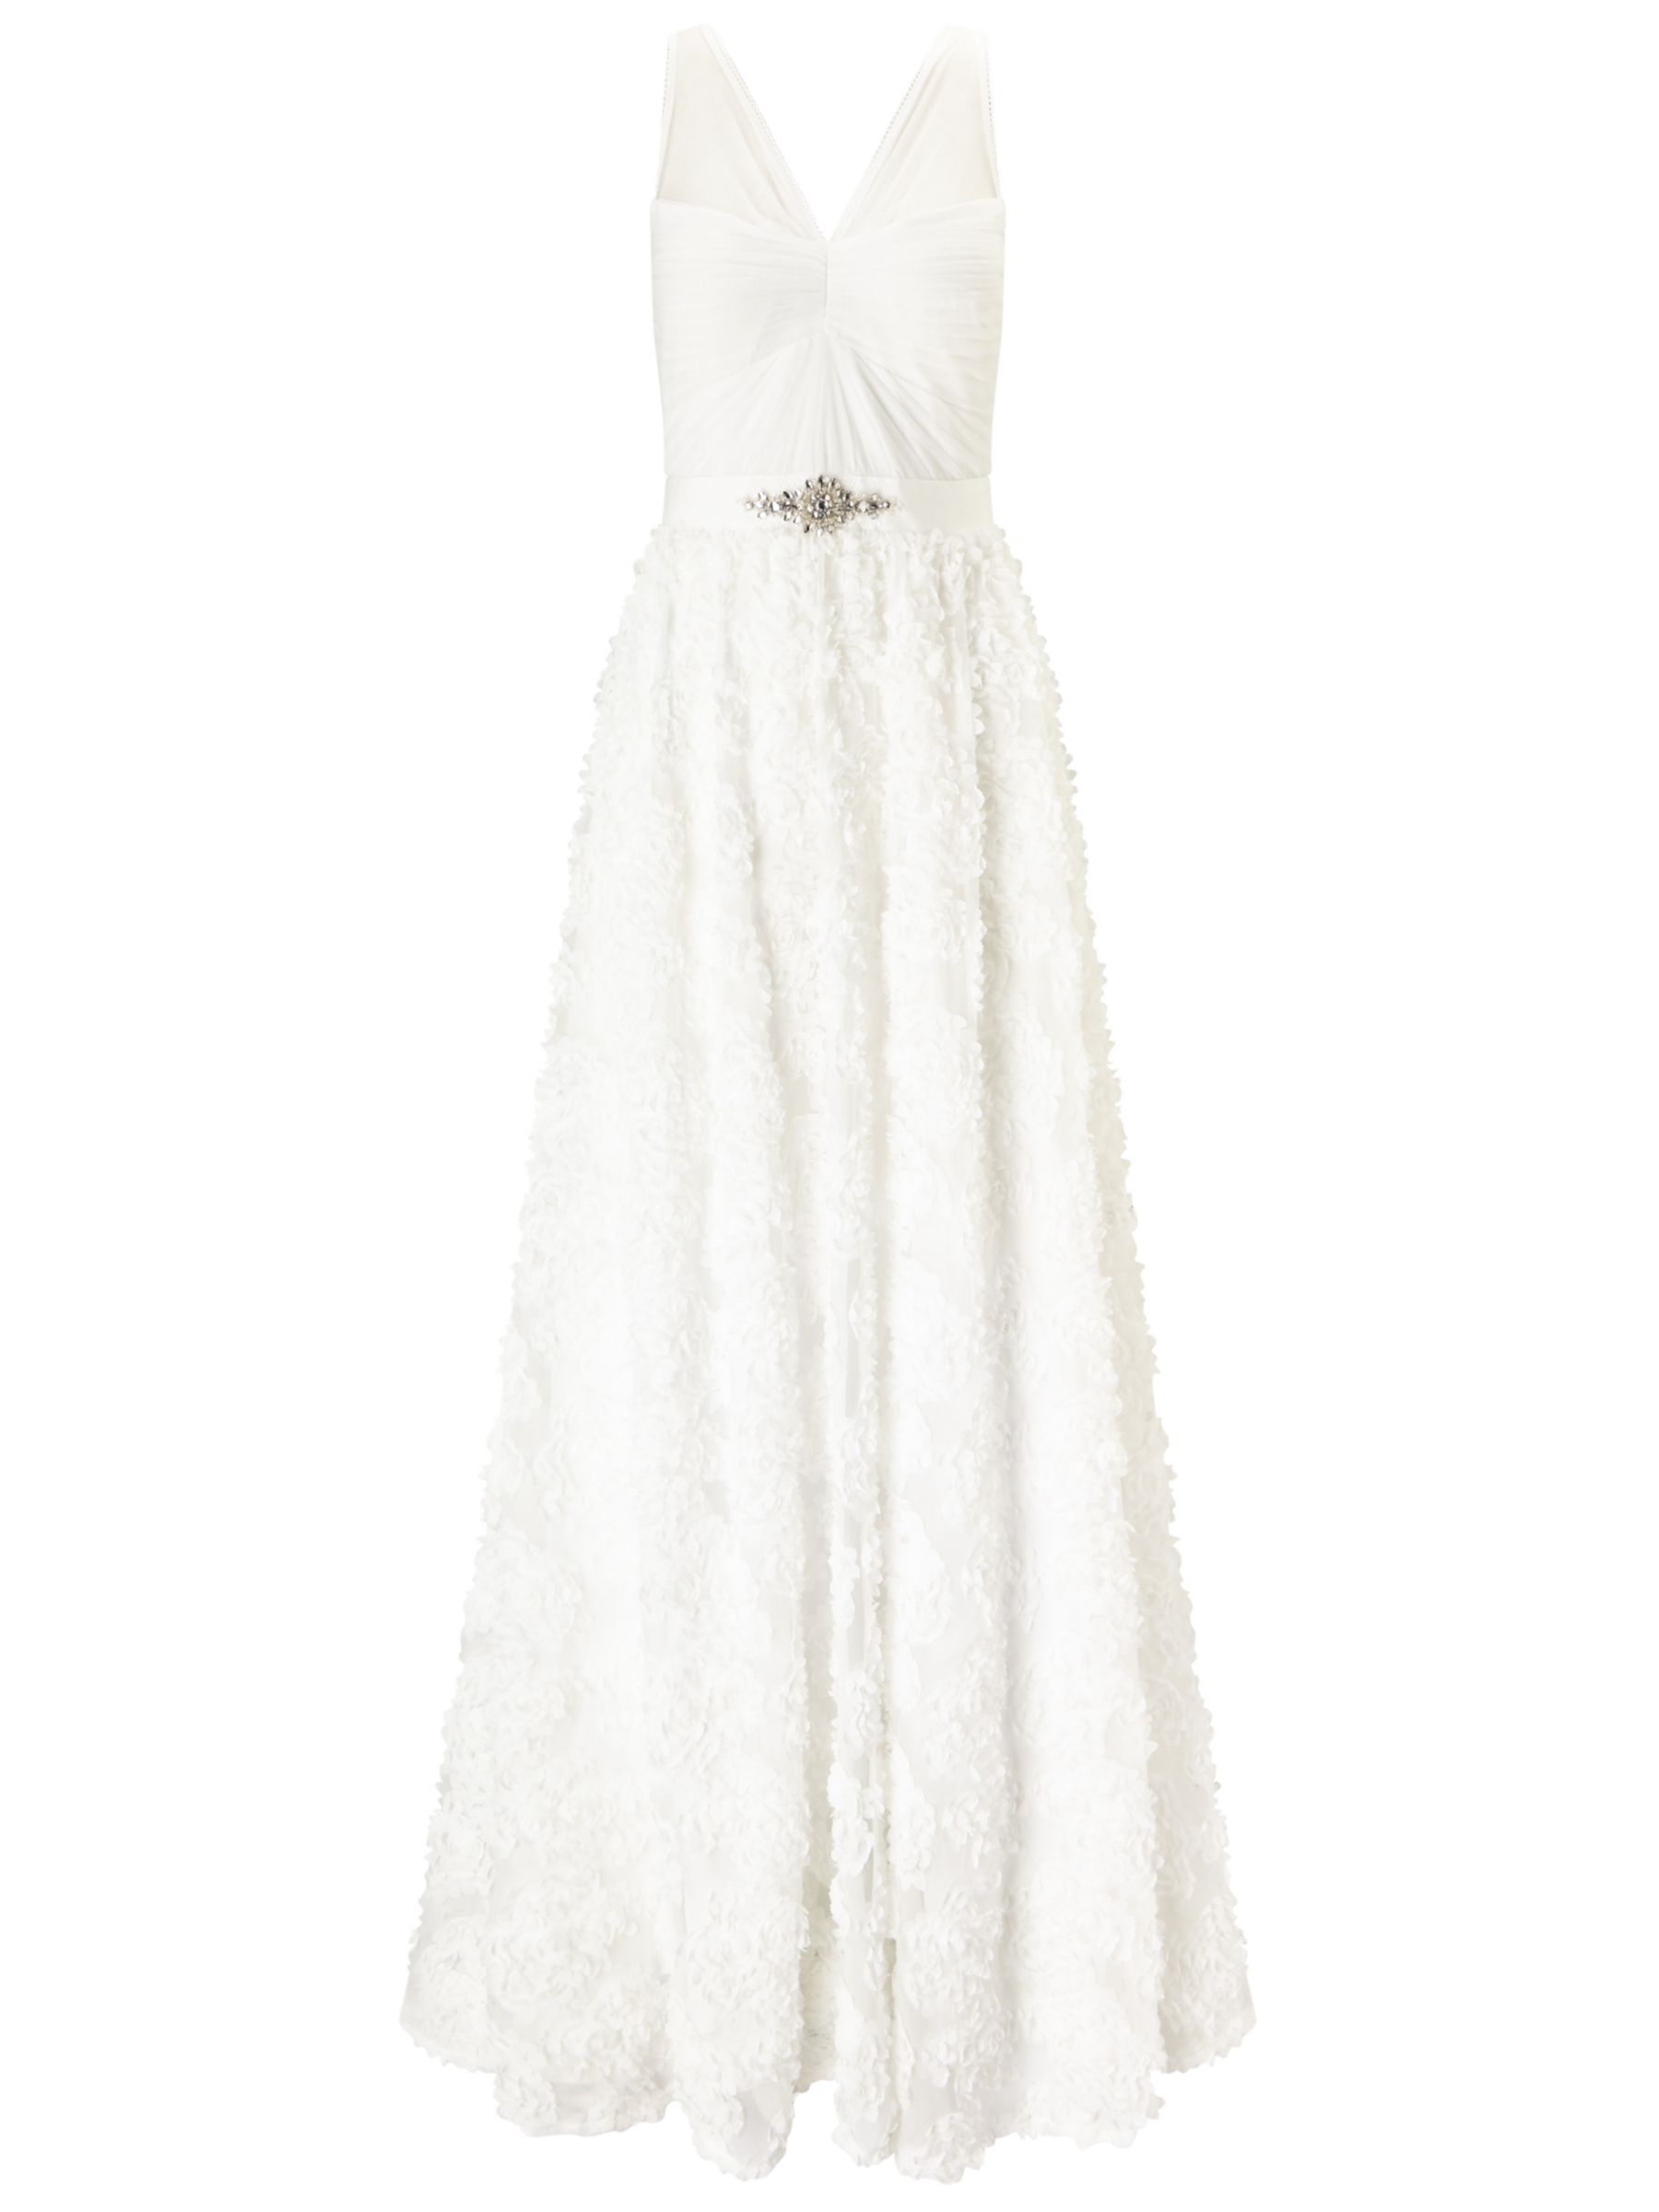 Adrianna Papell Sleeveless Tulle Chiffon Bridal Gown, Ivory